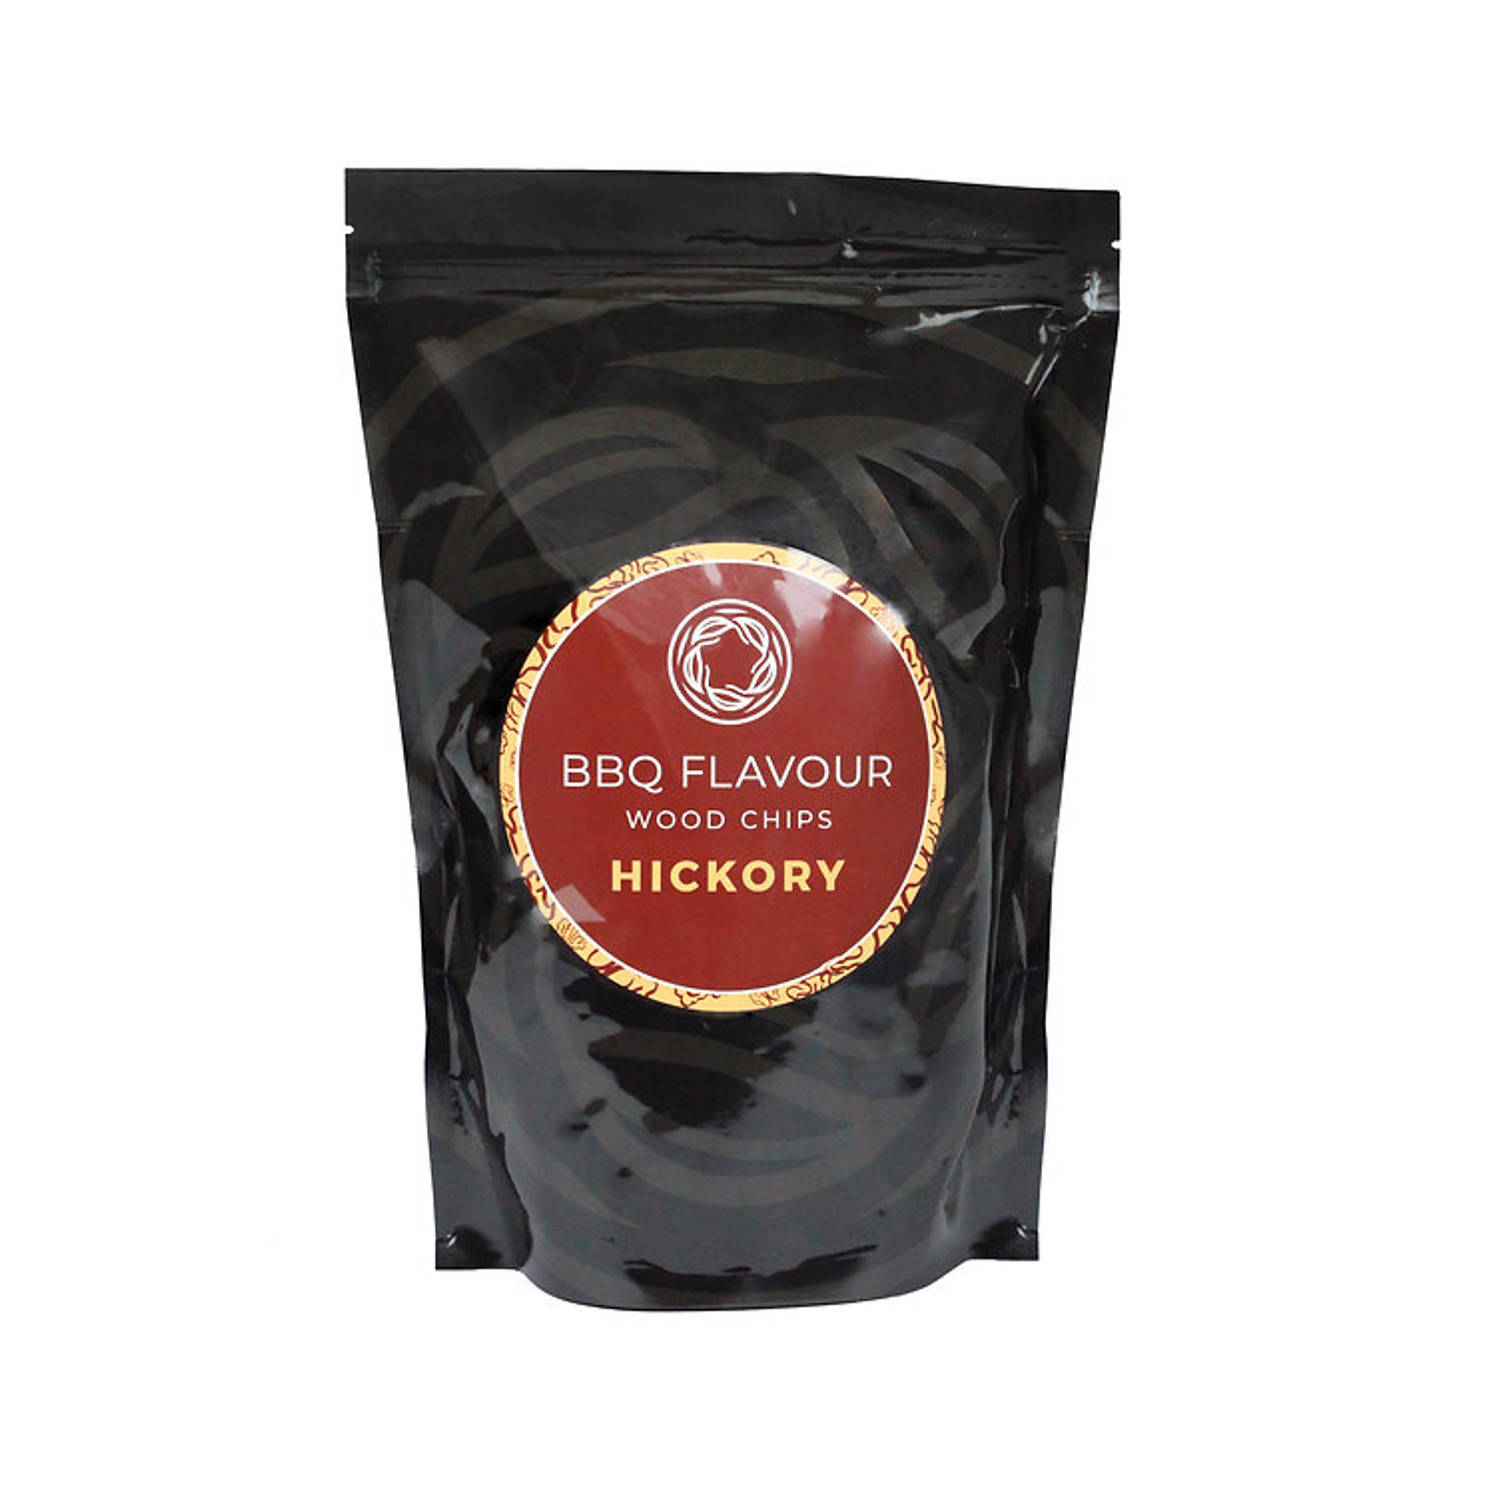 Bbq Flavour Rookhout Hickory Smoke Wood Hickory Hickoryhout Bbq Rookhout Chips Kamado Tafelgrill Gas